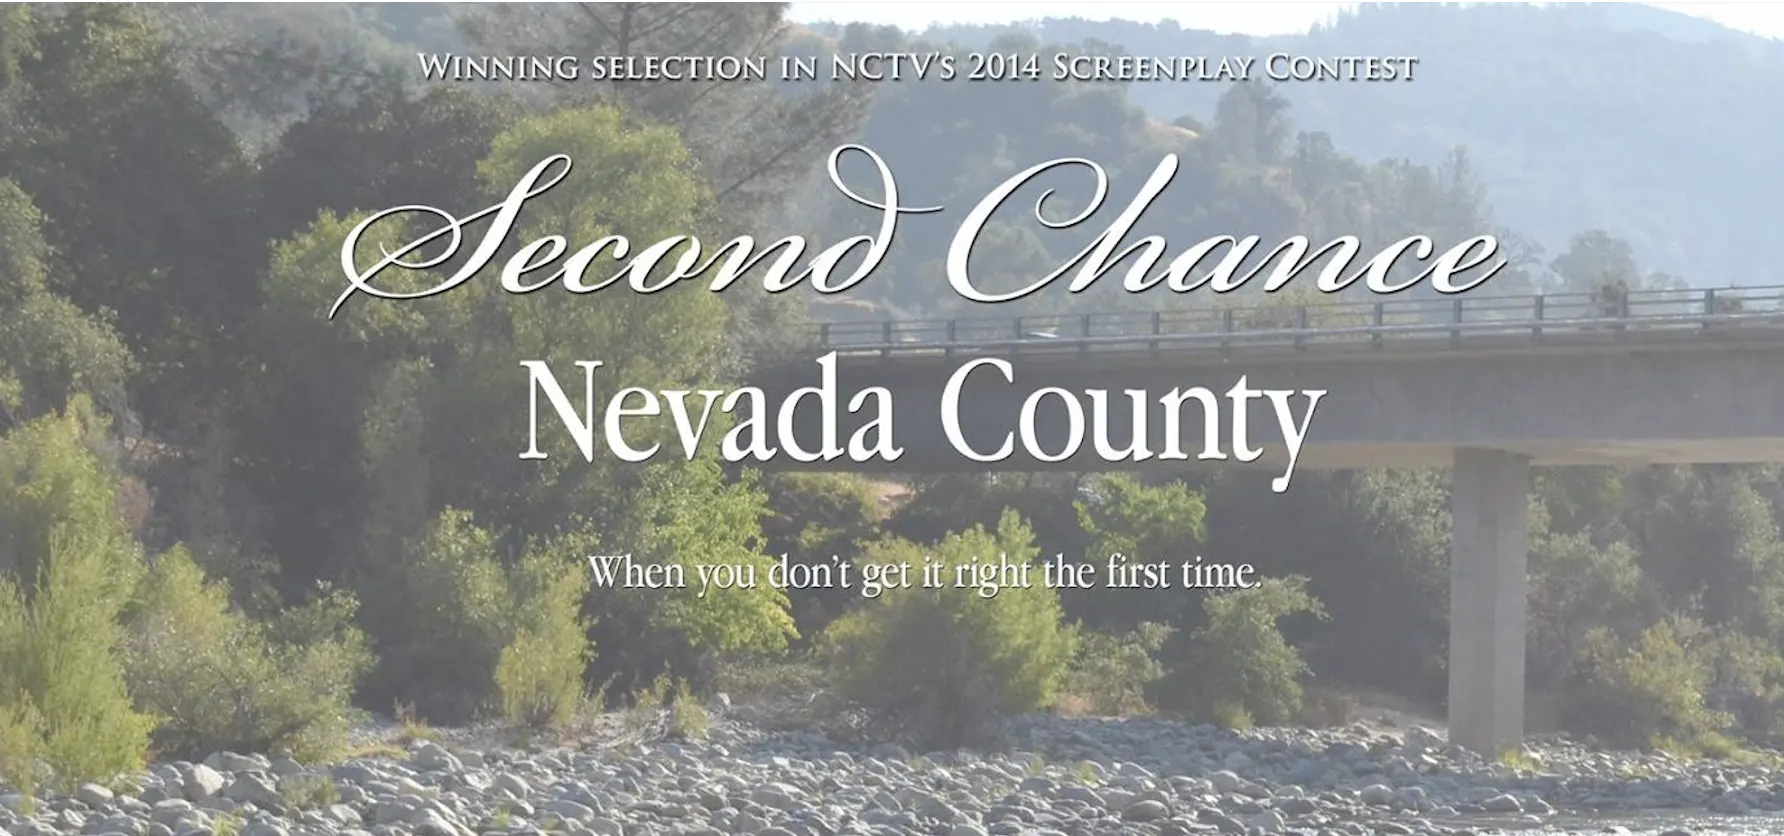 Second Chance, Nevada County title cover.